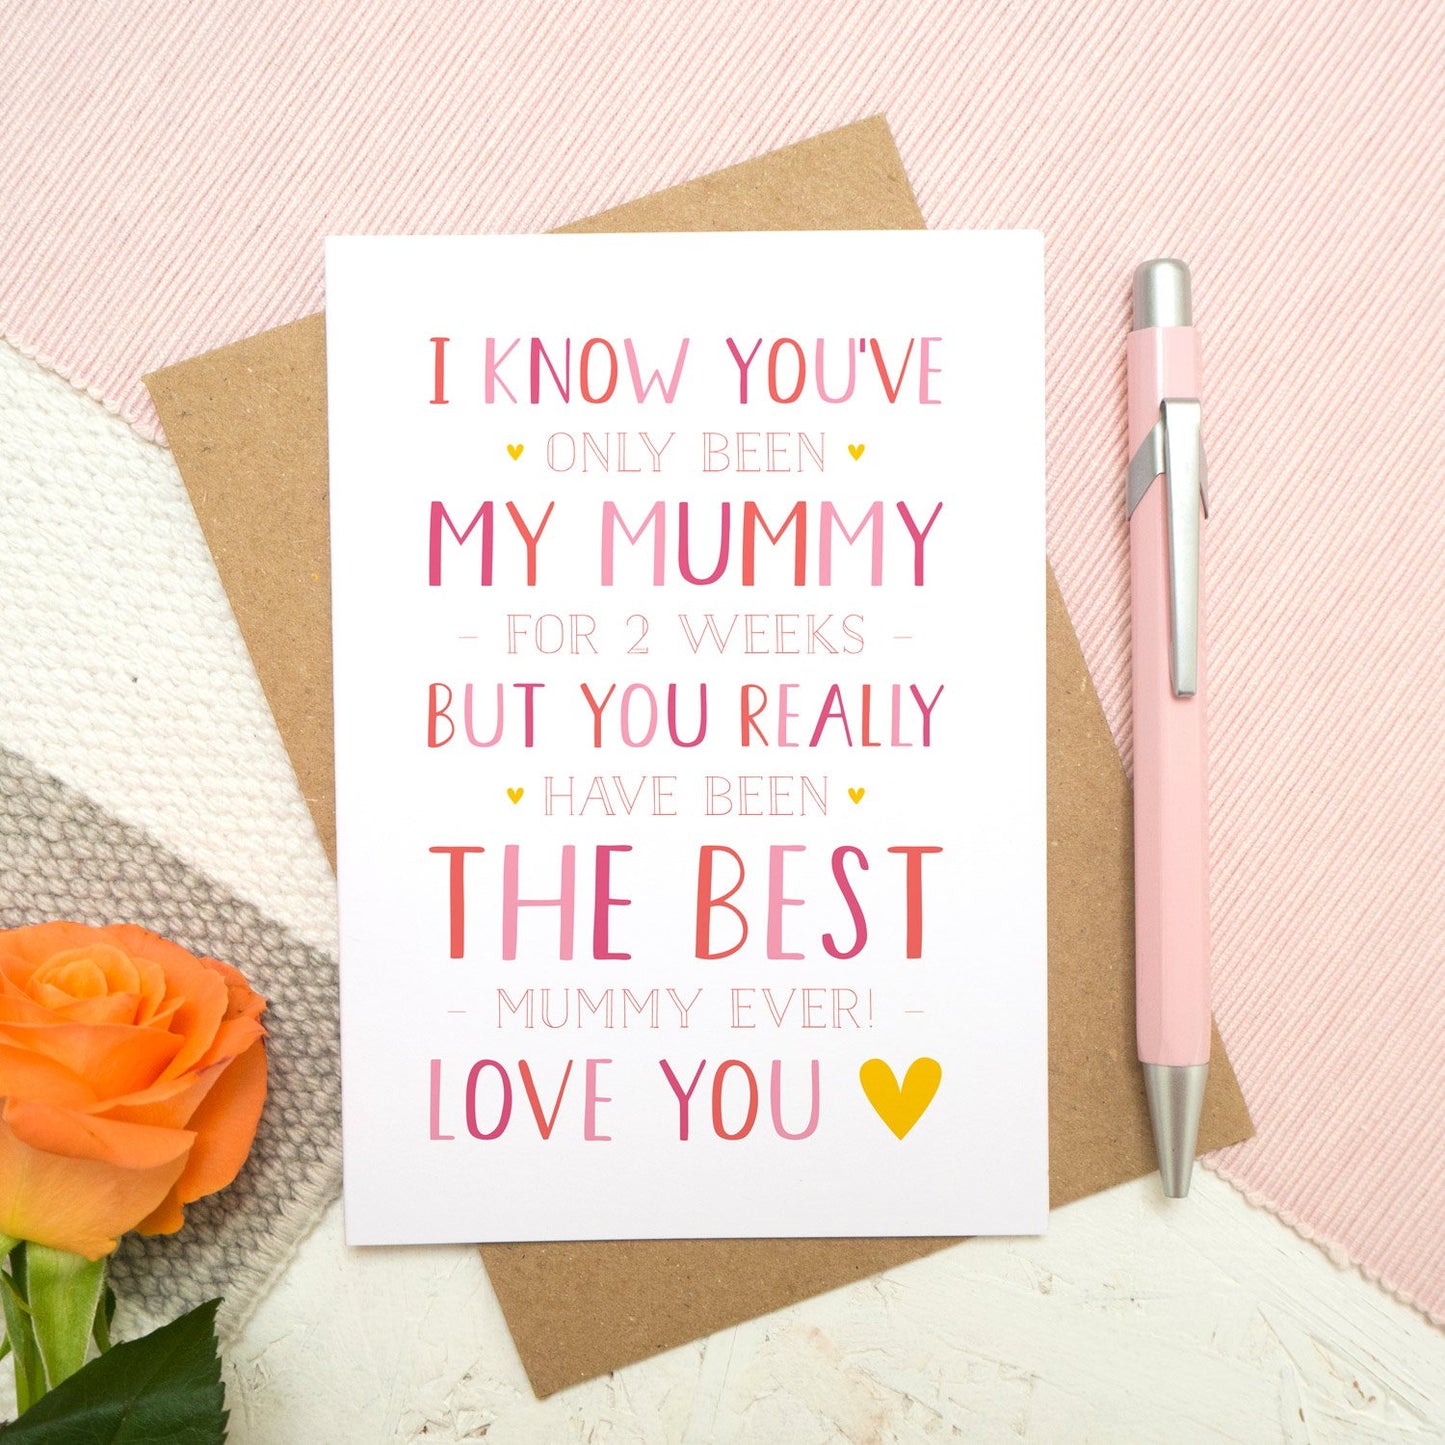 A personalised brand new mummy mother's day card, letting the mum know that she is the best and is loved! Set on a pink, white and grey background with a peach rose.